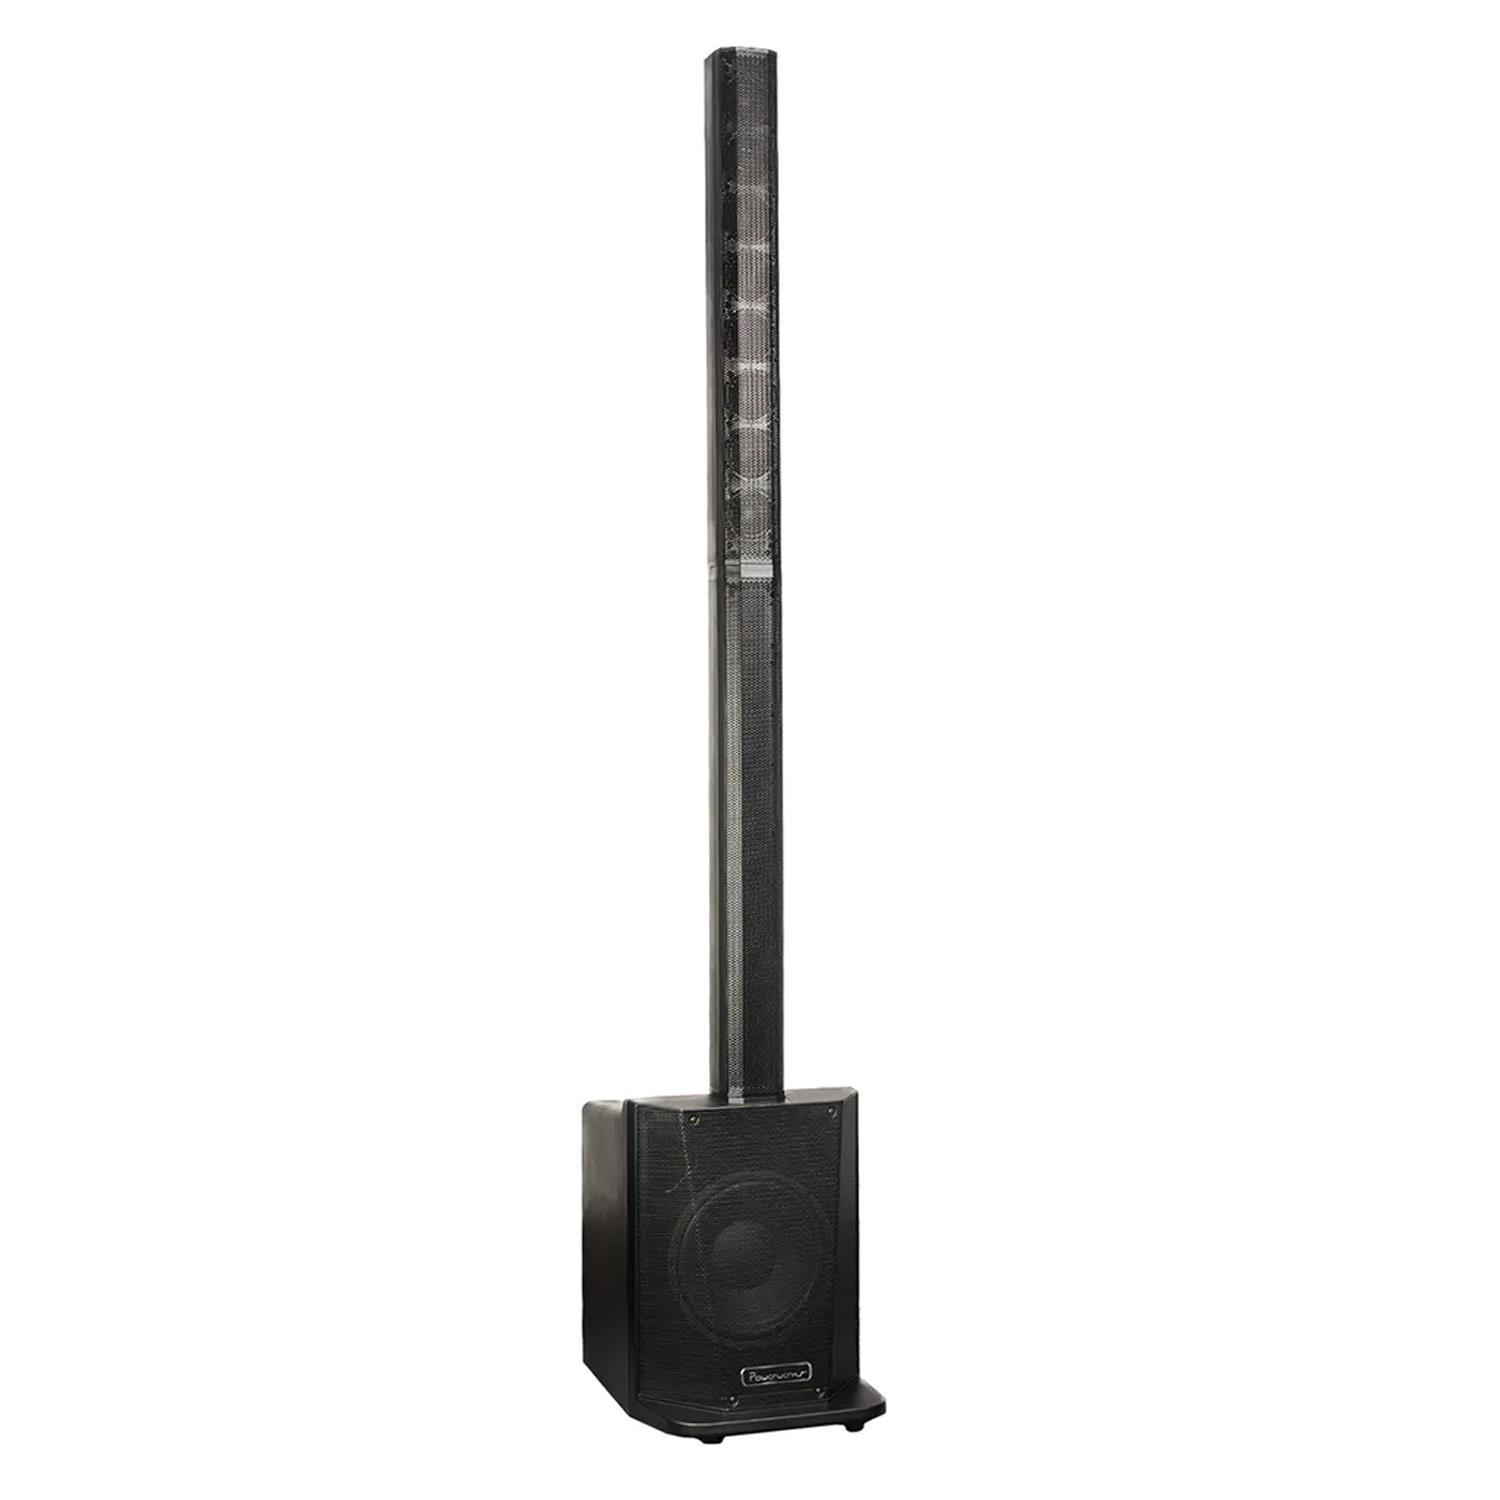 Powerwerks 1050w System One Powered Column Array System with Bluetooth - DY Pro Audio